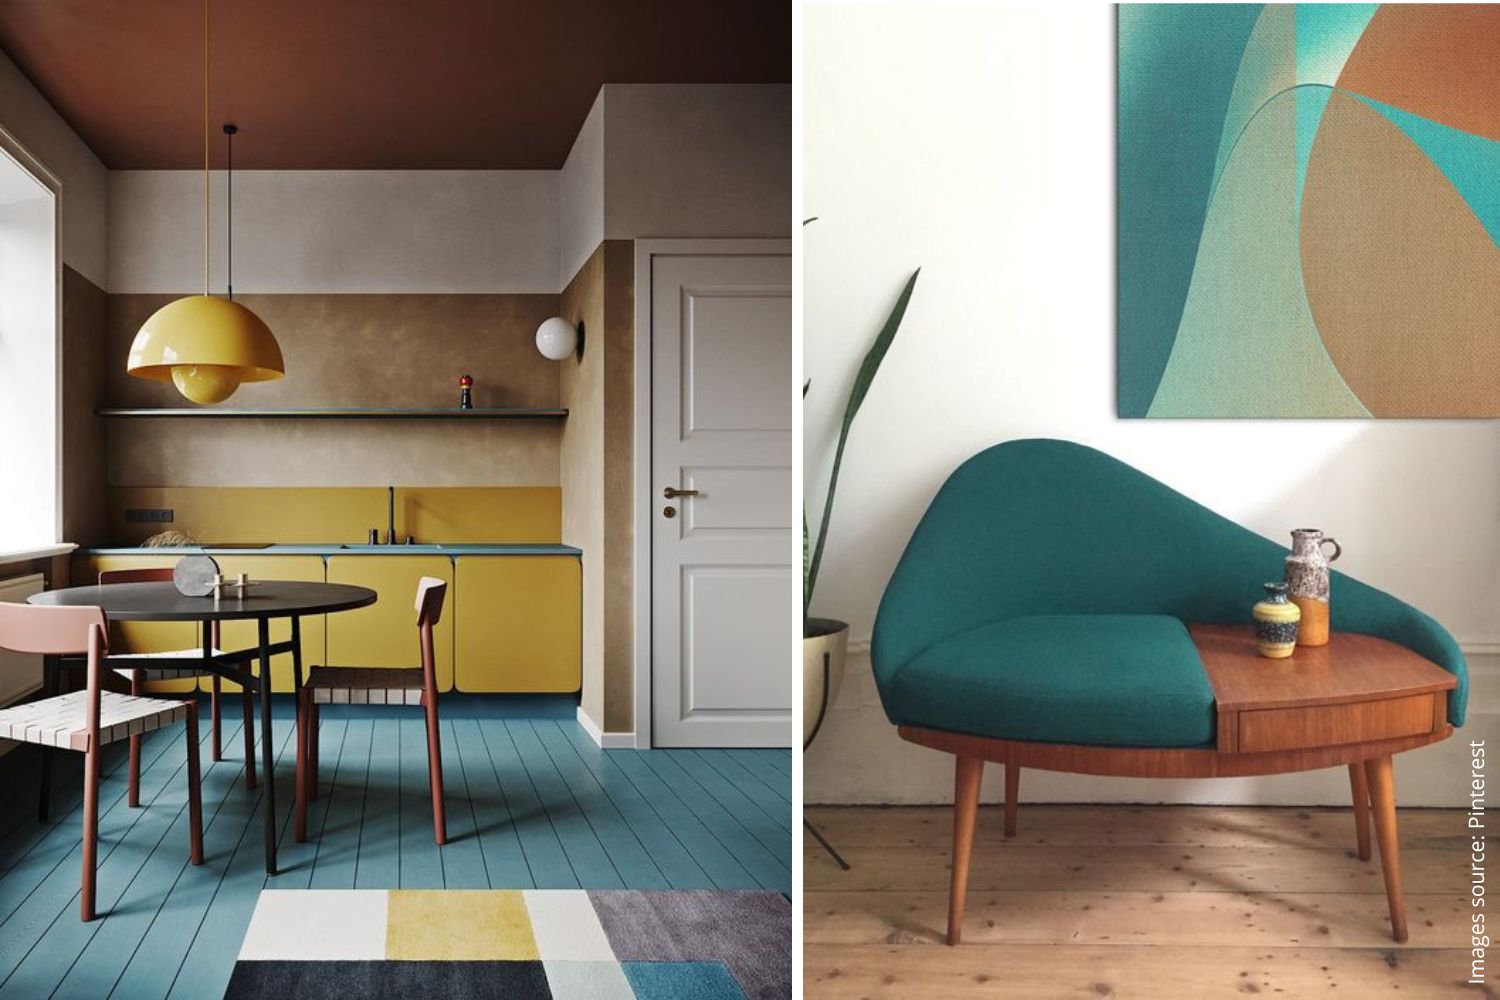 1970s-inspired furniture